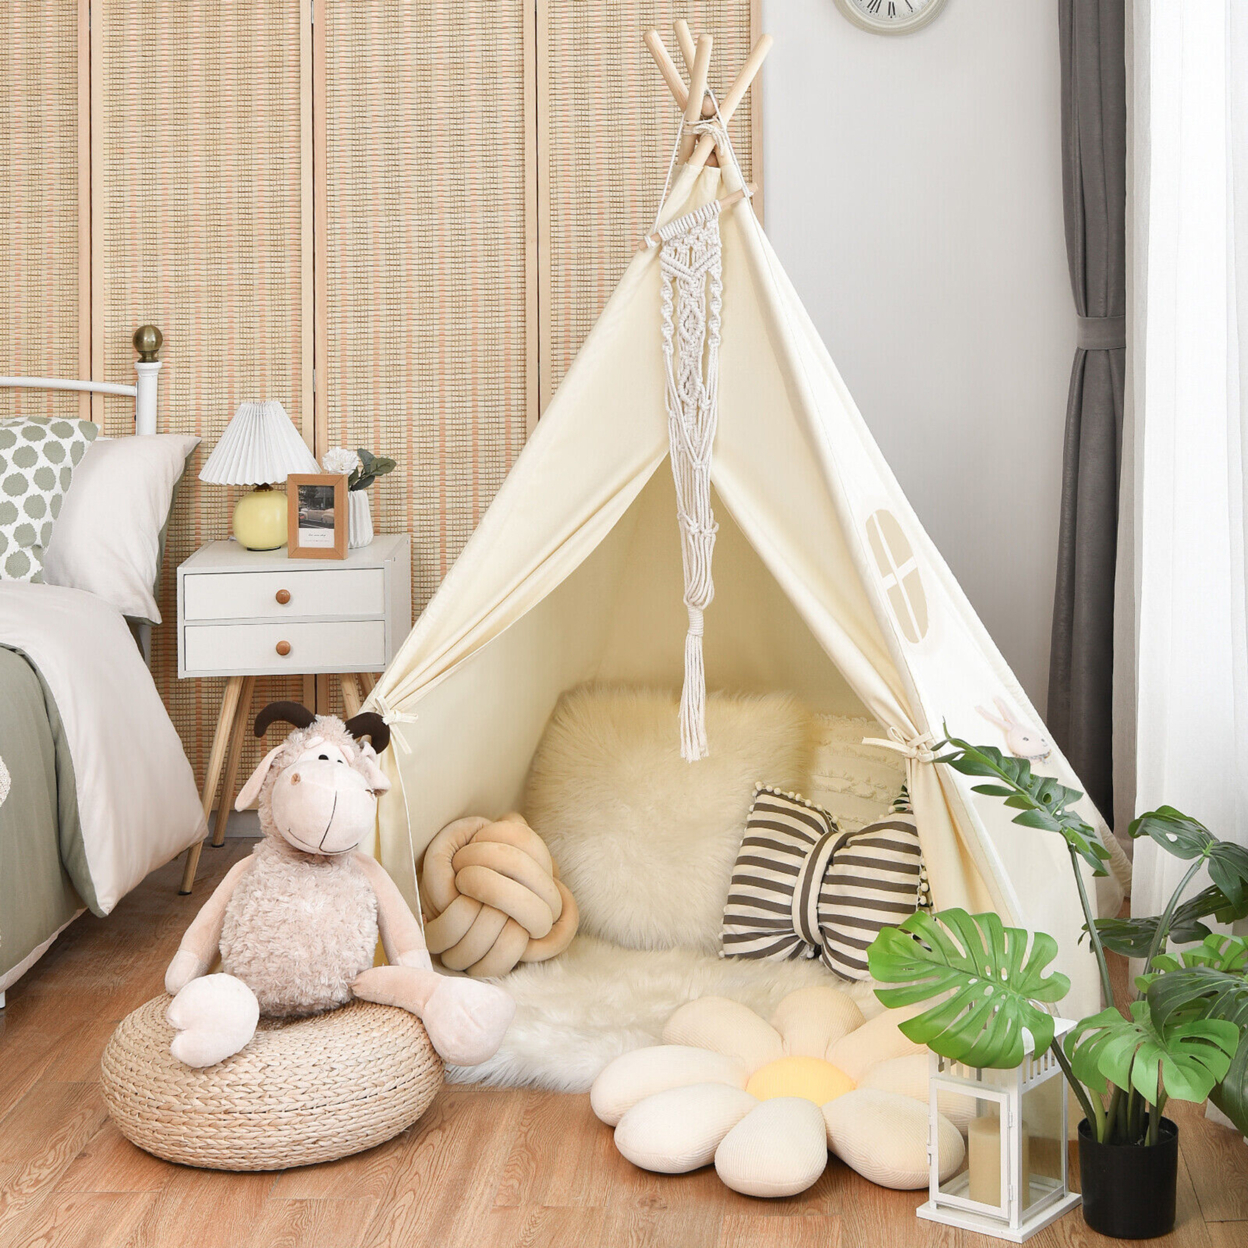 Portable Kids Play Tent Indian Canvas Teepee Playhouse Toy Gift W/ Window